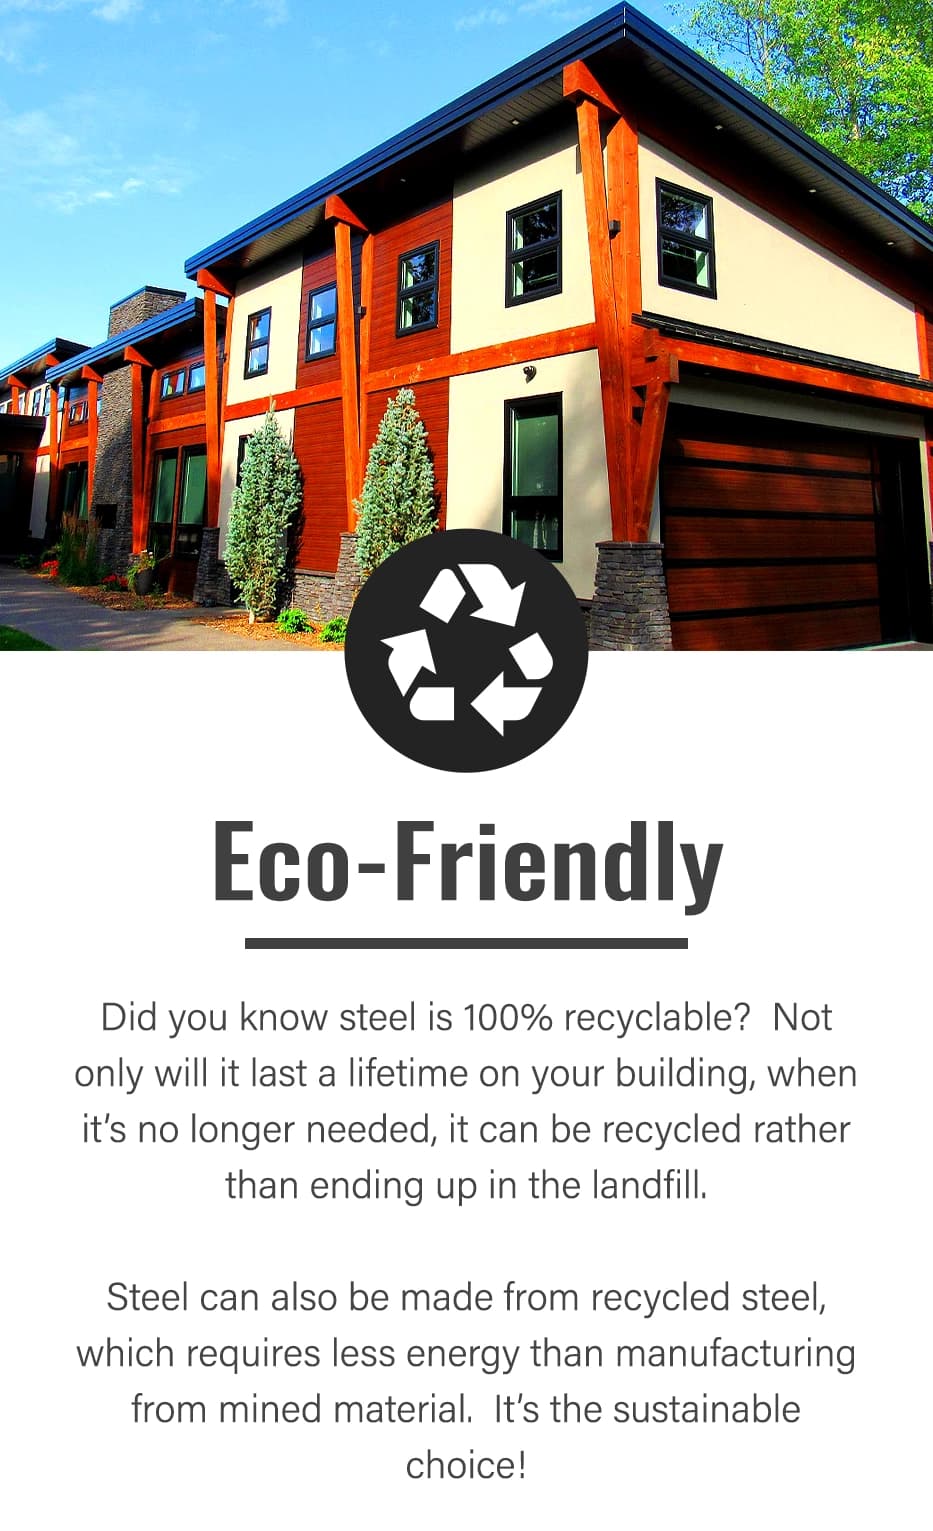 Did you know steel is 100% recyclable? It will last a lifetime time, and can be recycled rather than ending up in the landfill. Steel products can also be made from recycled steel, which requires less energy than using mined material.